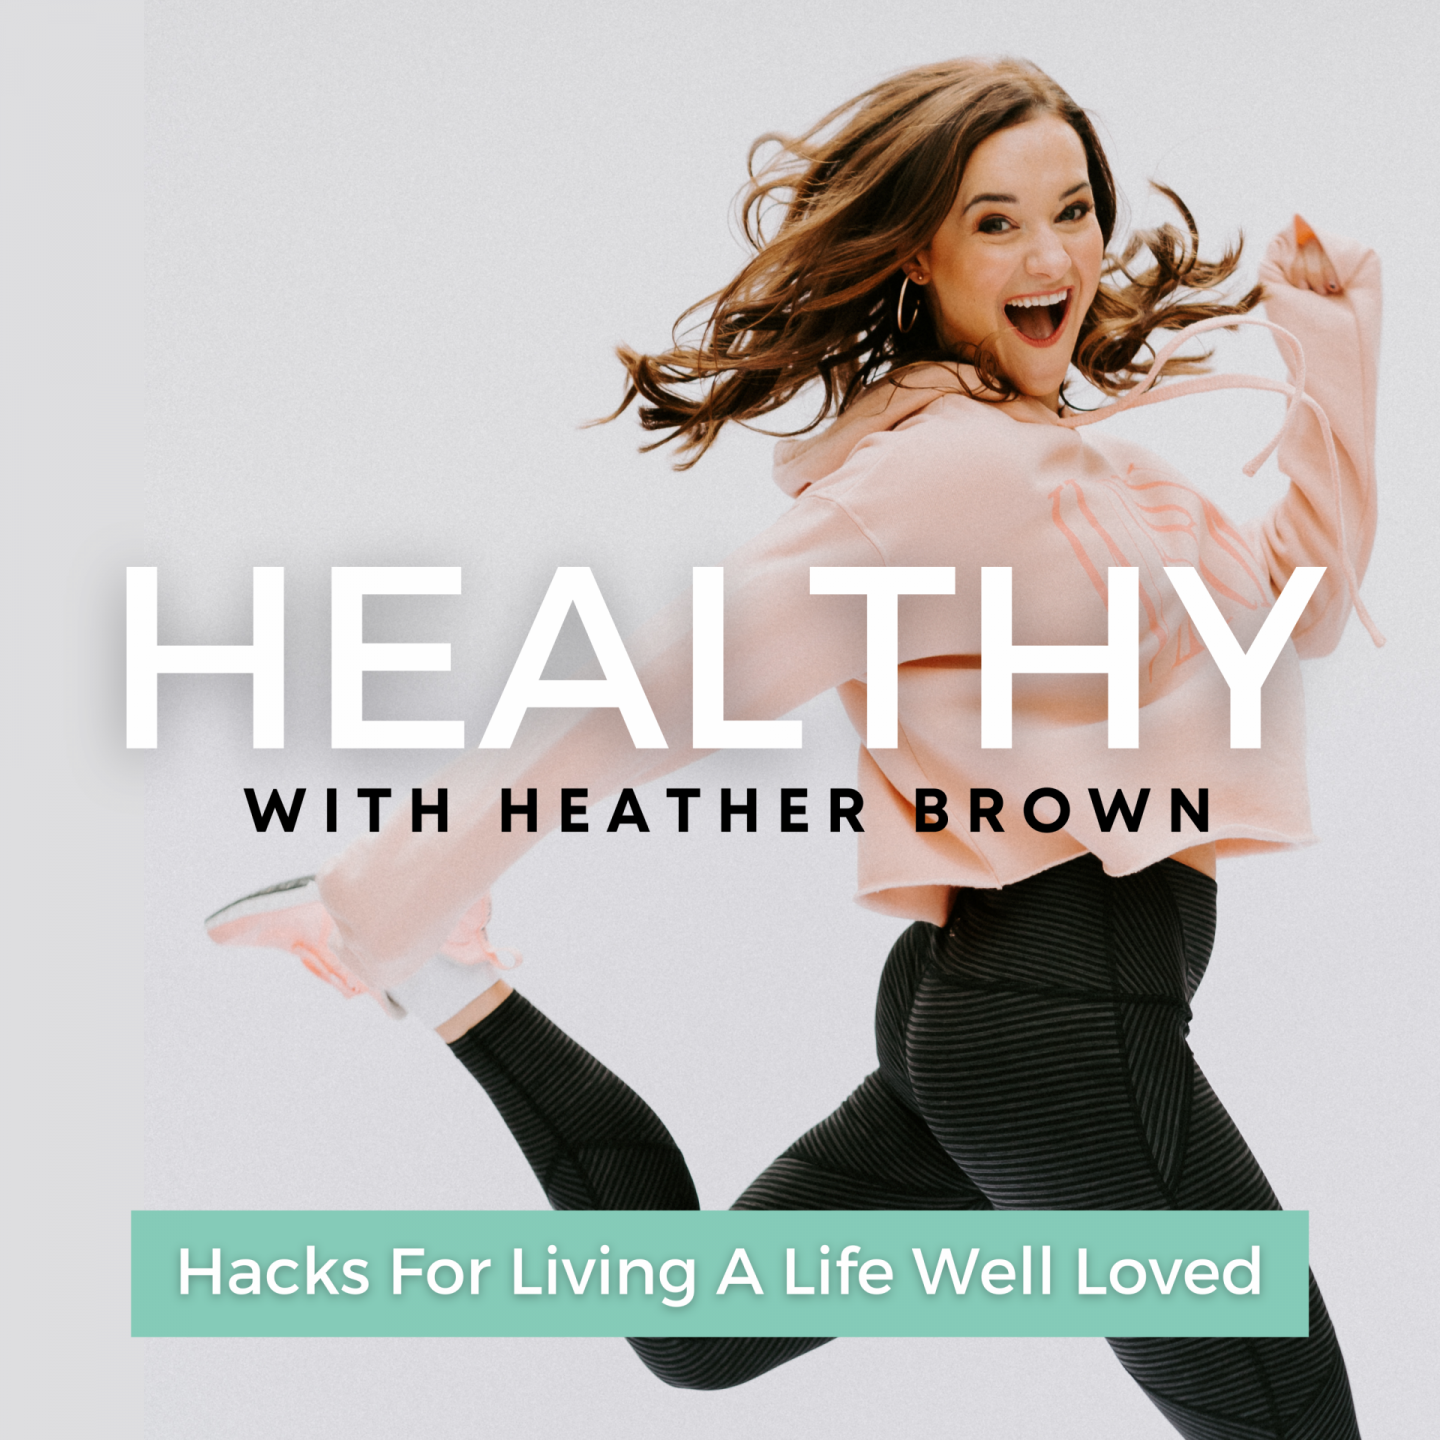 Mom + healthy lifestyle blogger, My Life Well Loved, shares her new Christian mom podcast! Click NOW to see what it's all about!